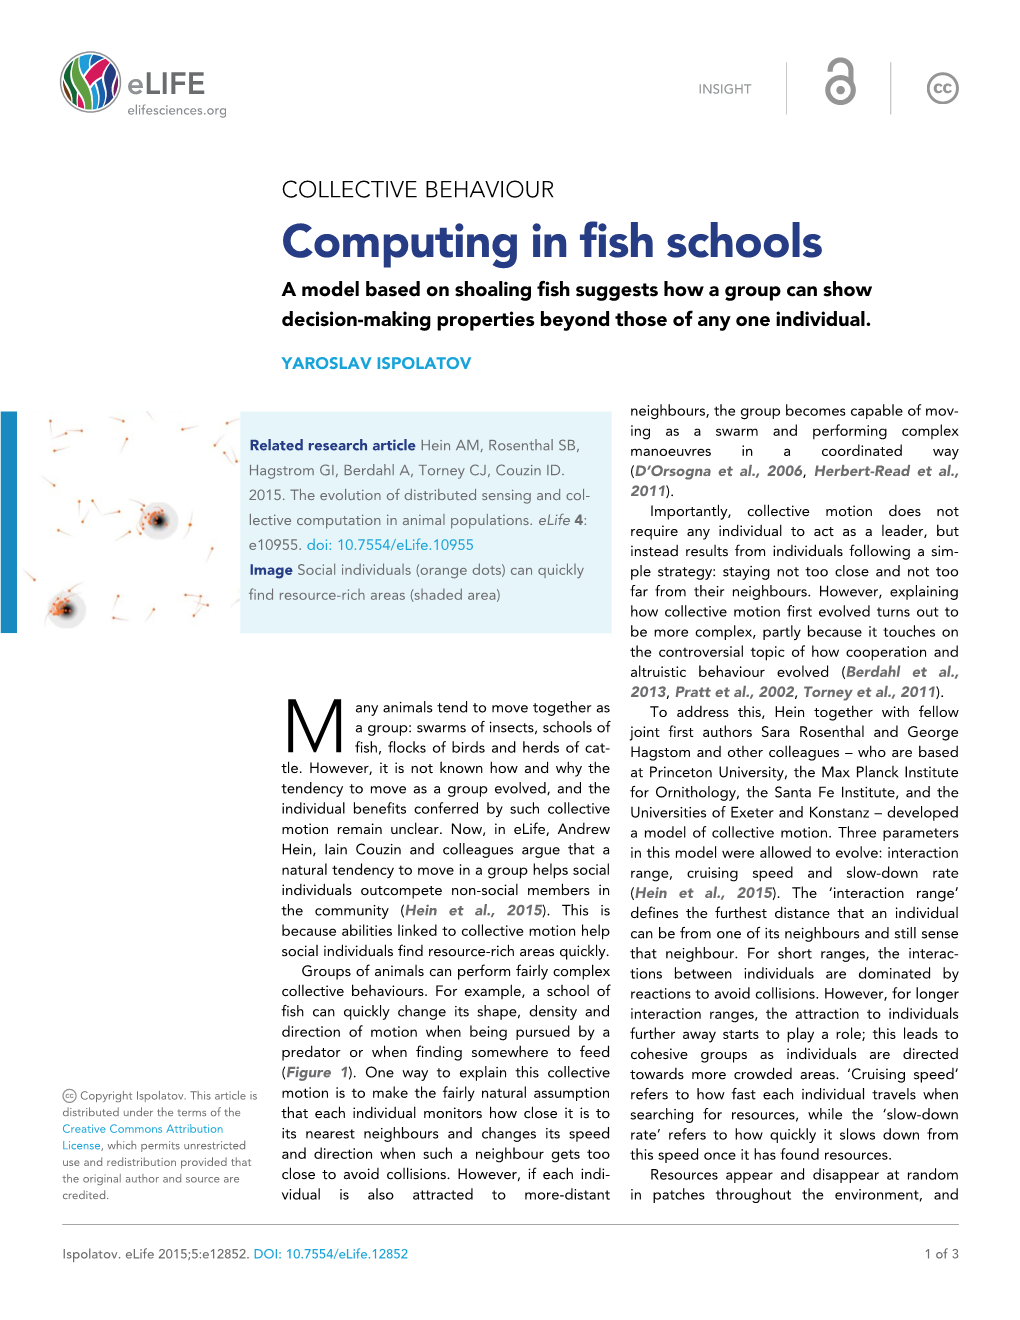 Computing in Fish Schools a Model Based on Shoaling Fish Suggests How a Group Can Show Decision-Making Properties Beyond Those of Any One Individual